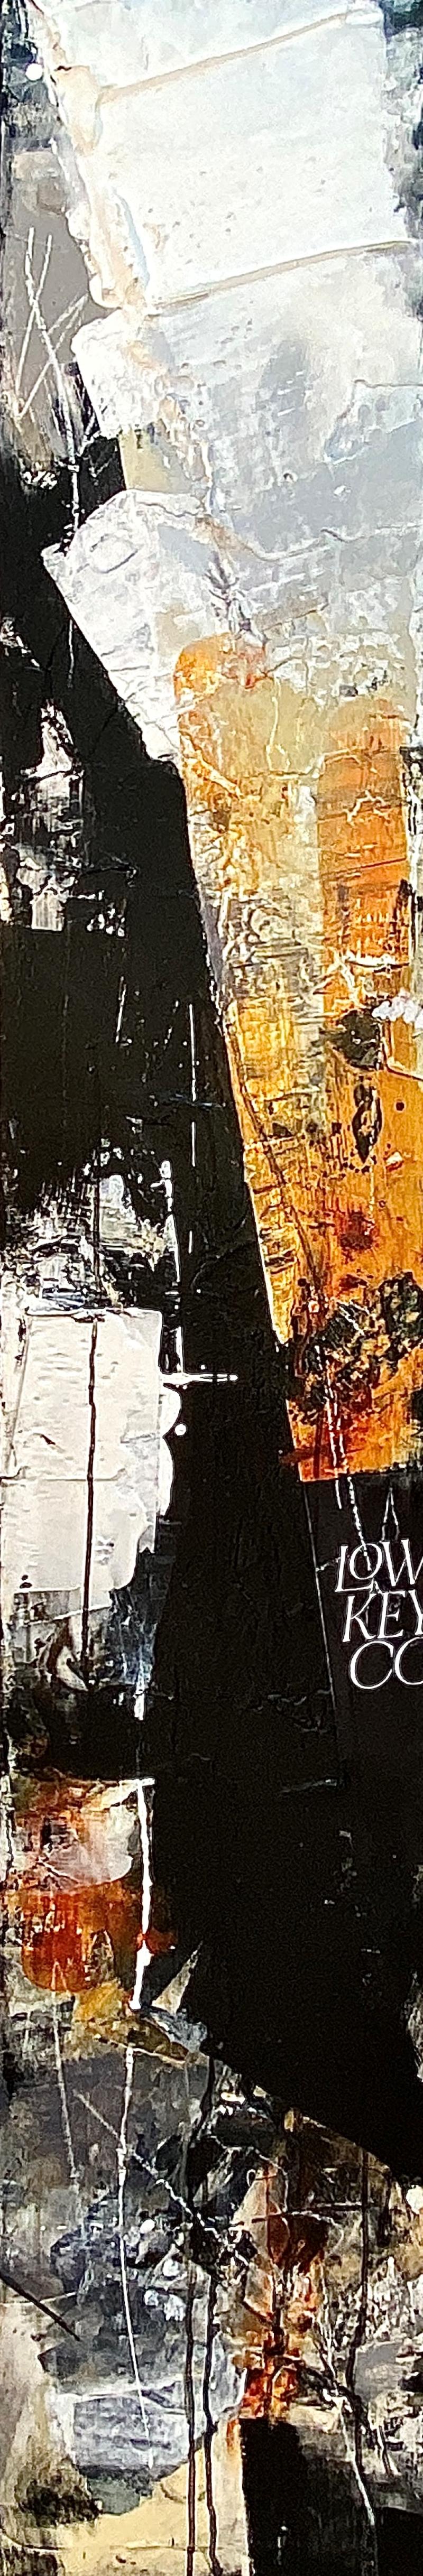 Michelle Thomas Artist Abstract Painting - "Colder", Street Styled, Abstract Expressionism, Black & White, Collage Acrylic 